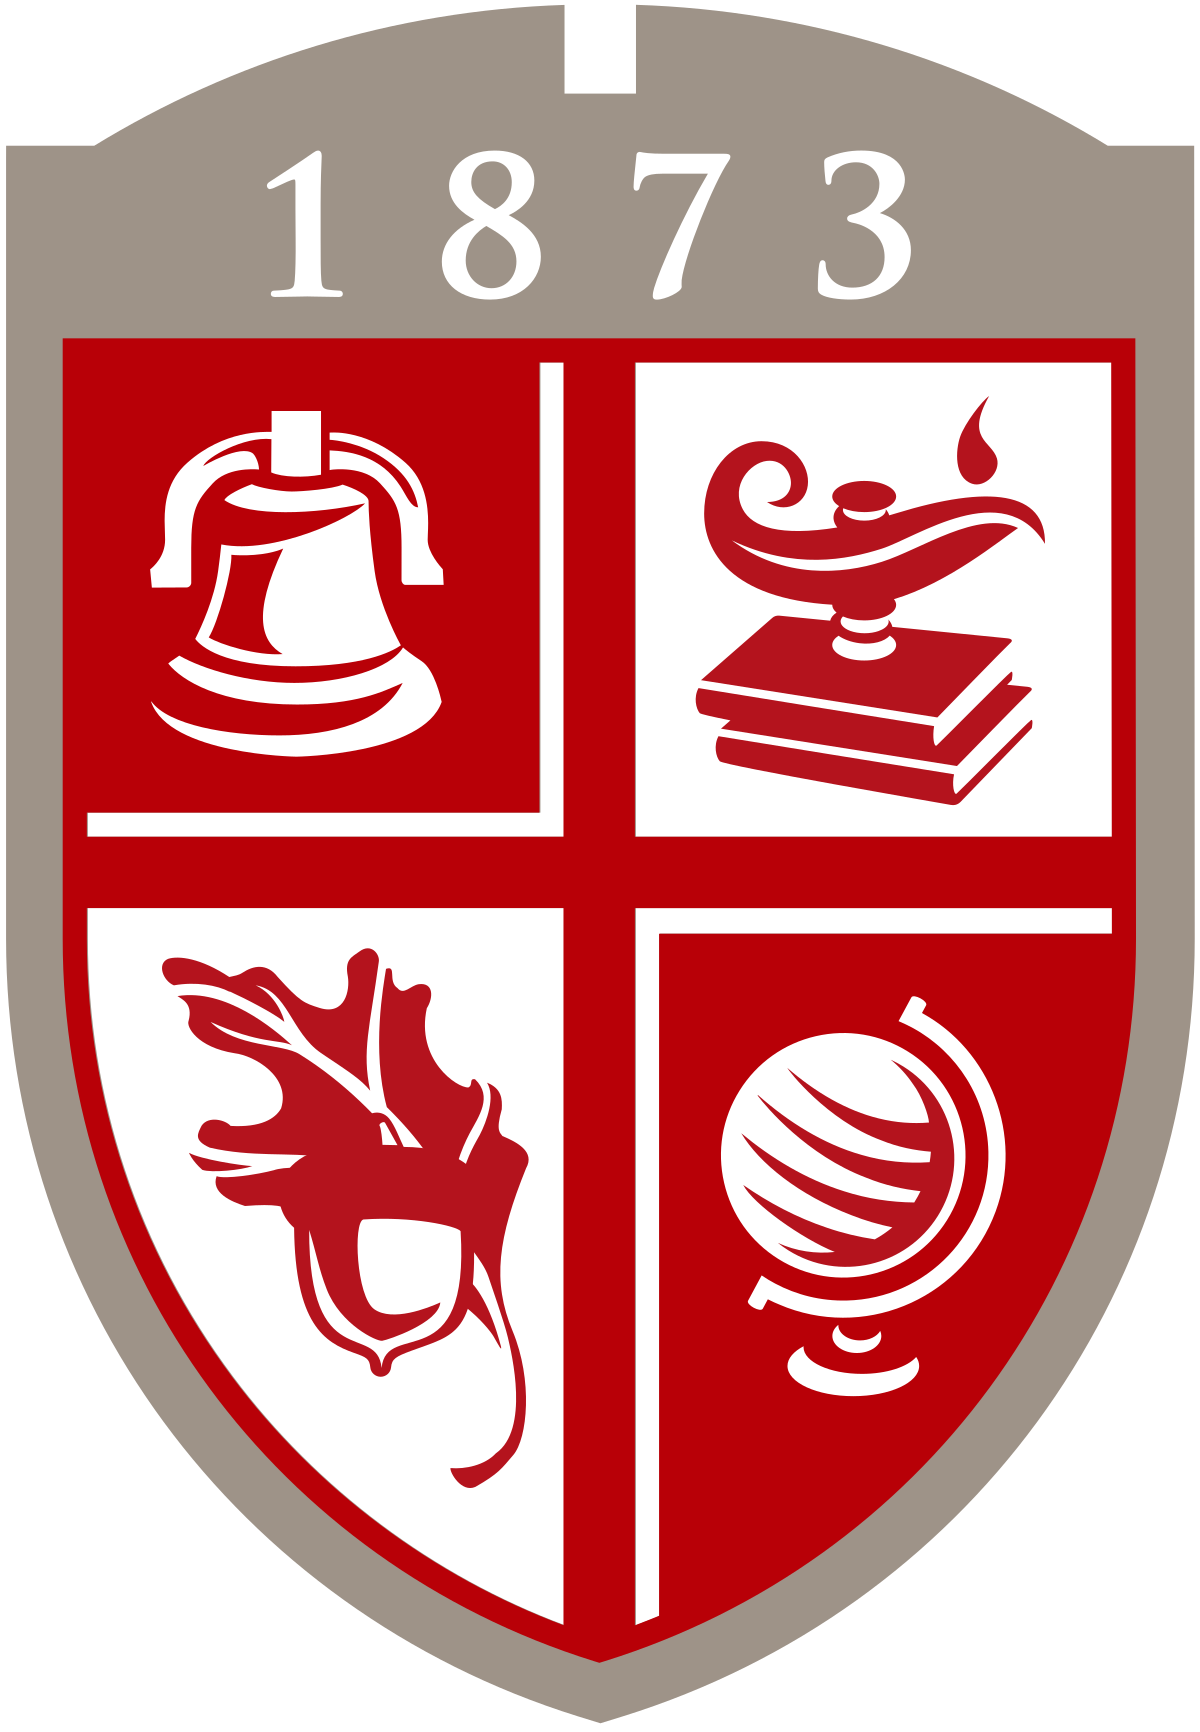 A logo of Drury University for our school profile